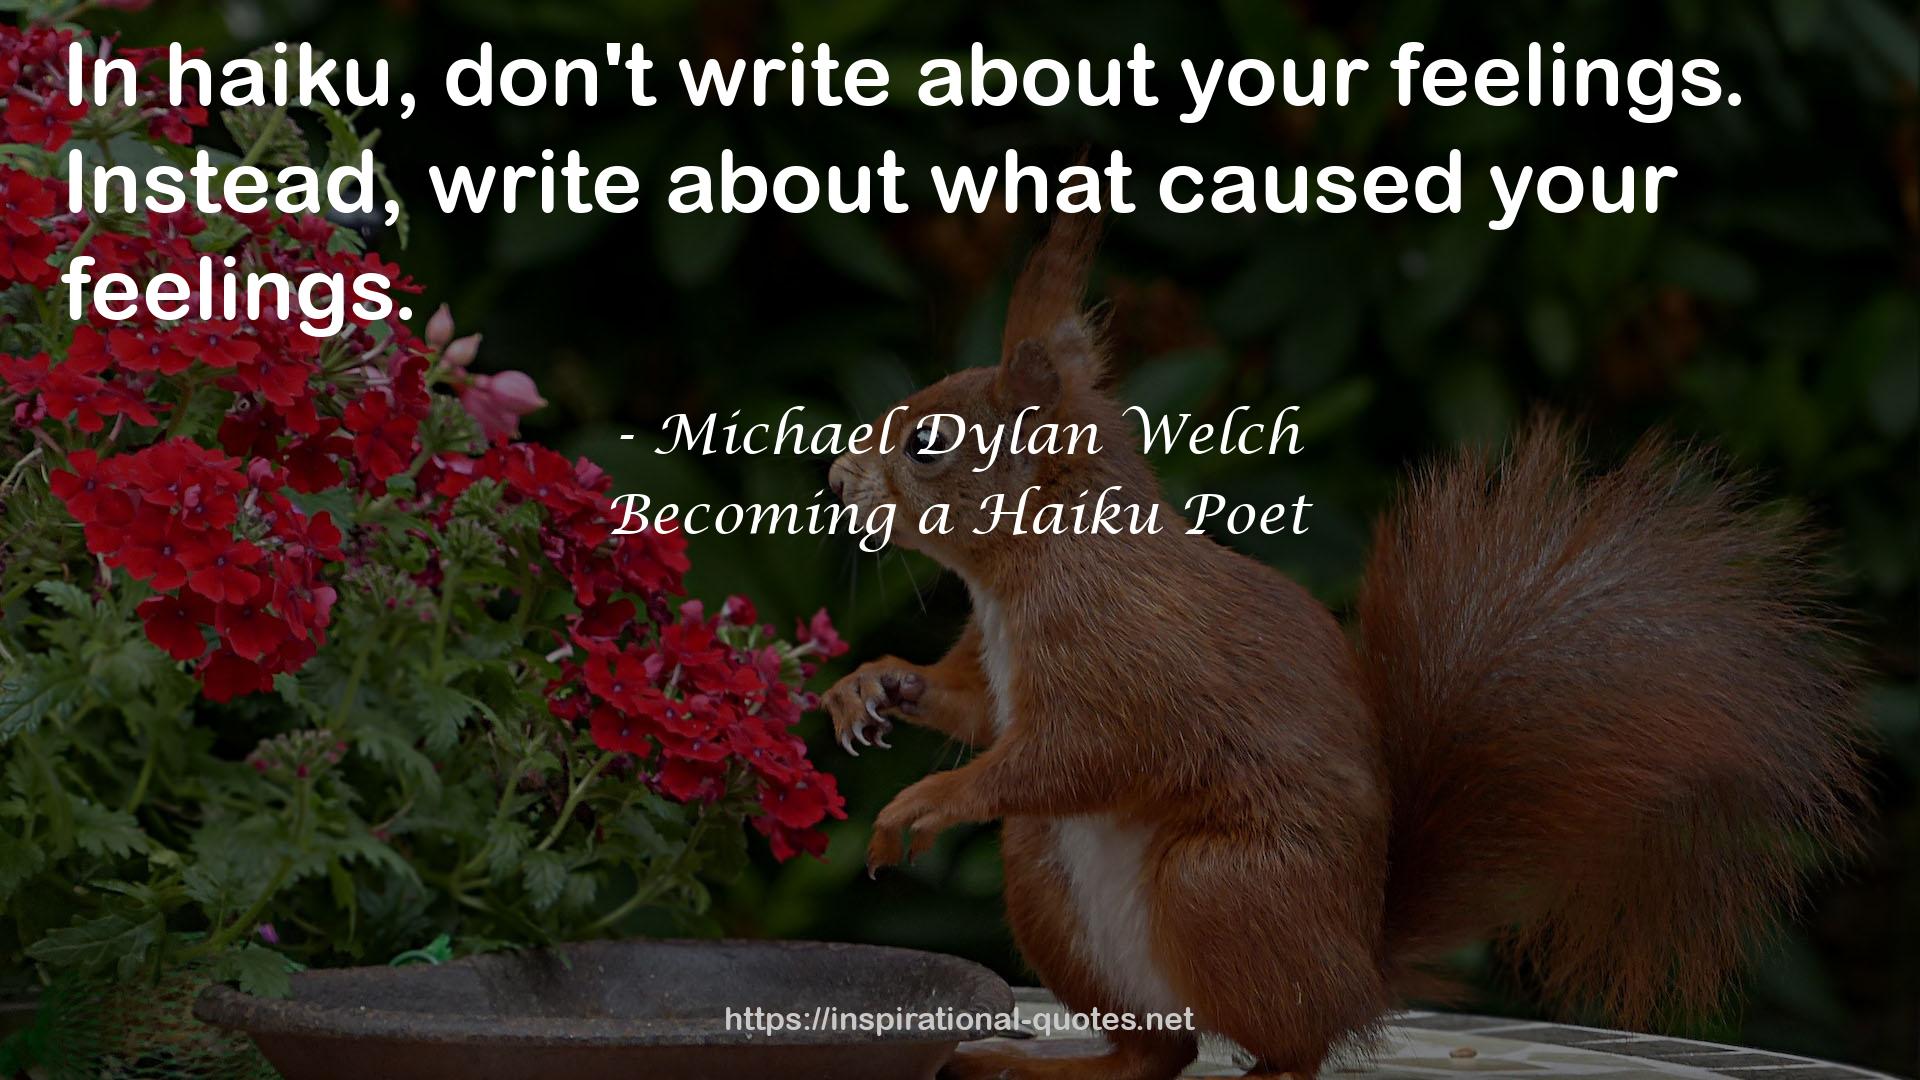 Michael Dylan Welch QUOTES